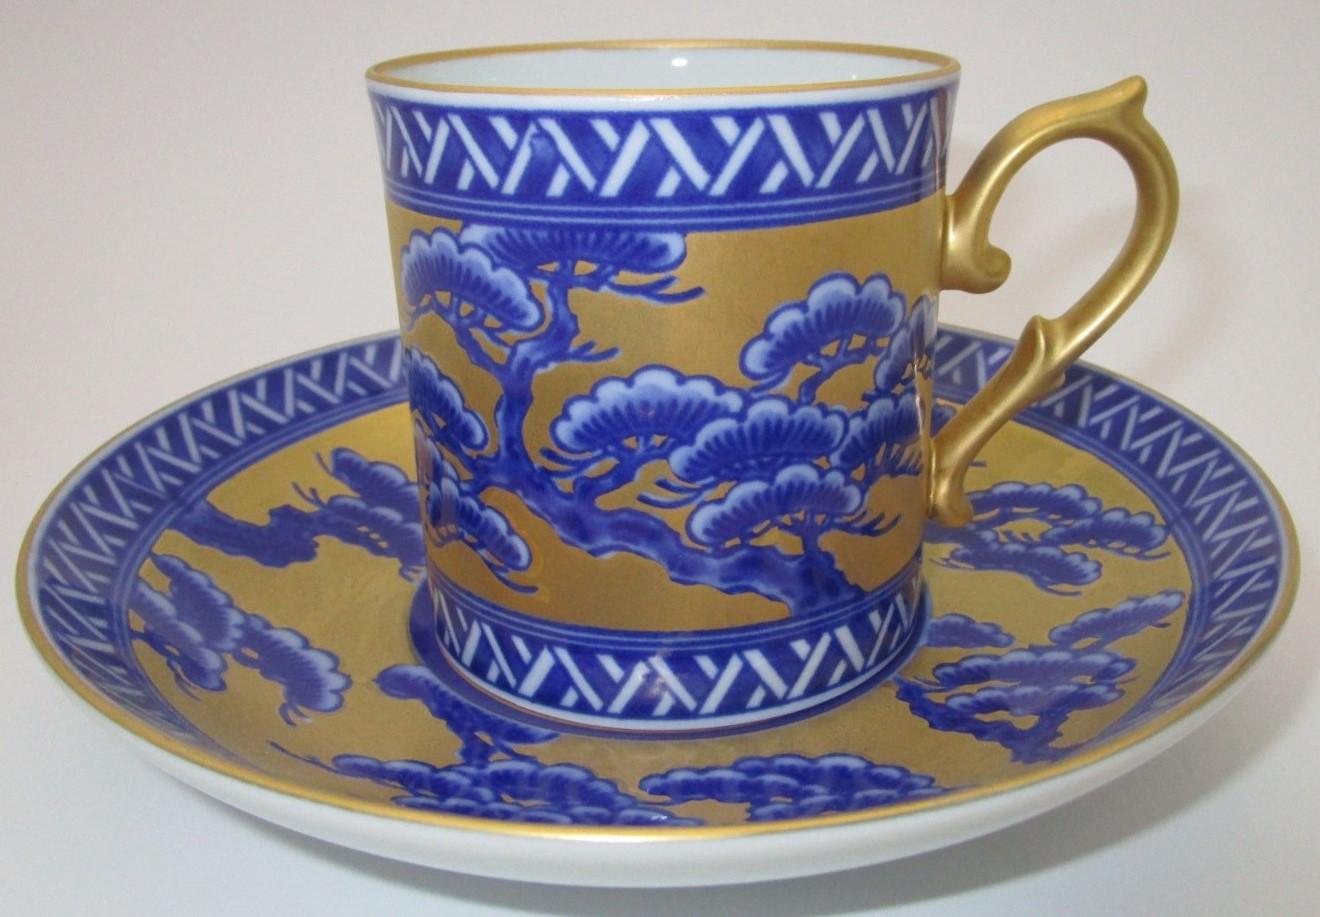 Gilt Japanese Contemporary Gilded Blue Ko-Imari Porcelain Cup and Saucer Hand Painted